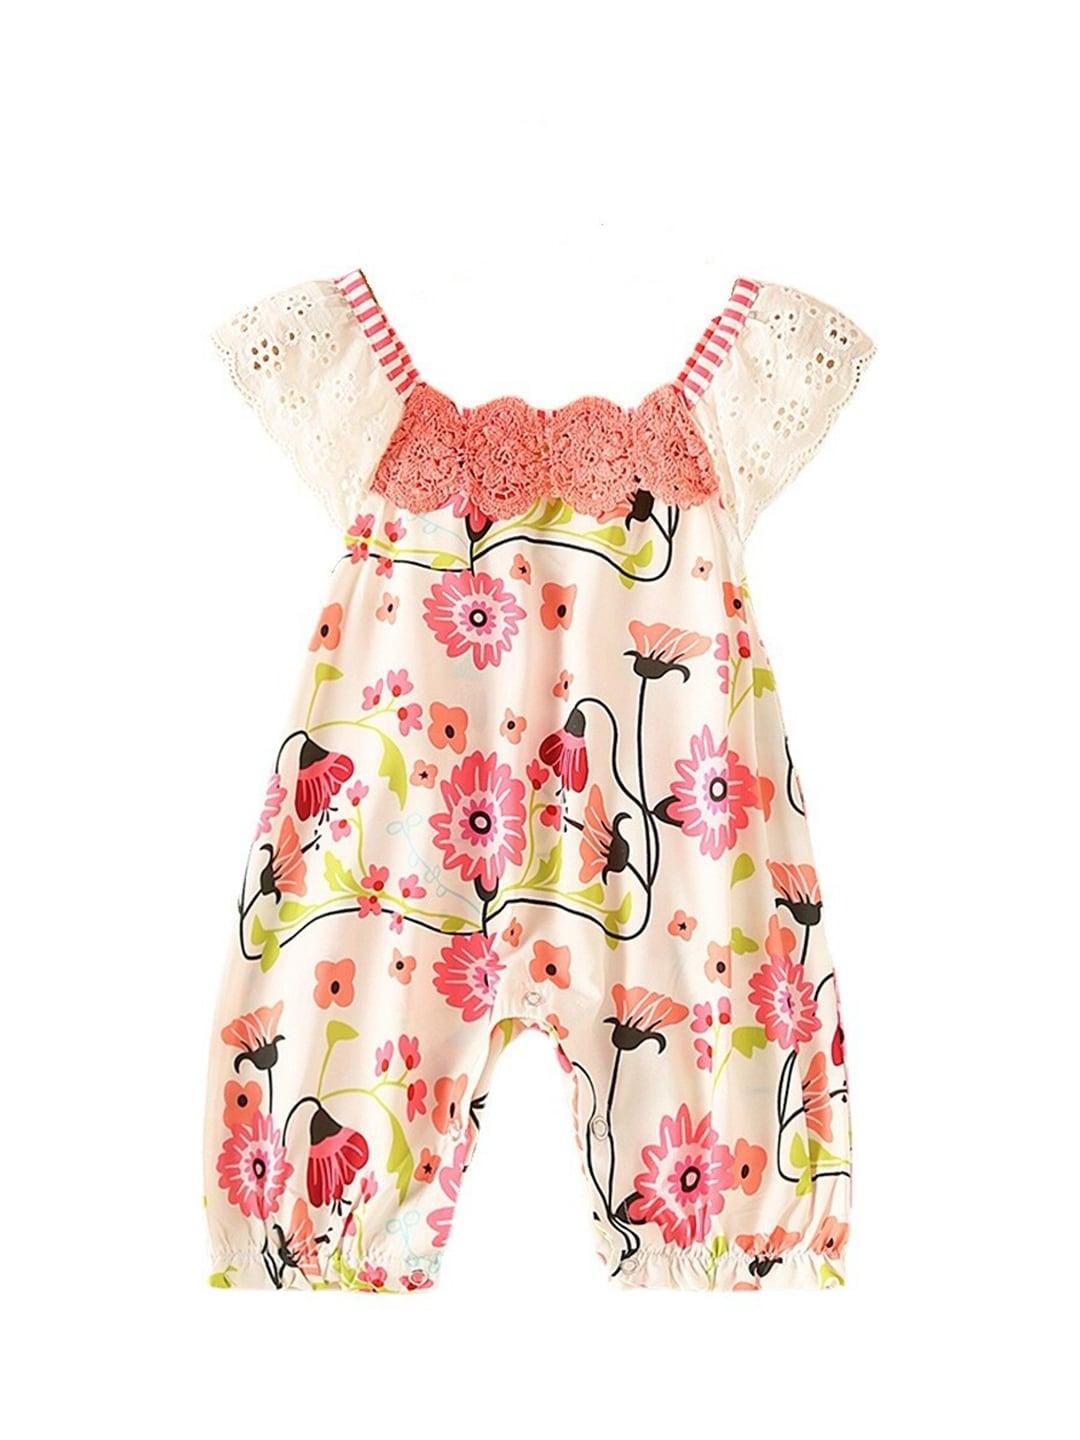 stylecast-infant-girls-printed-rompers